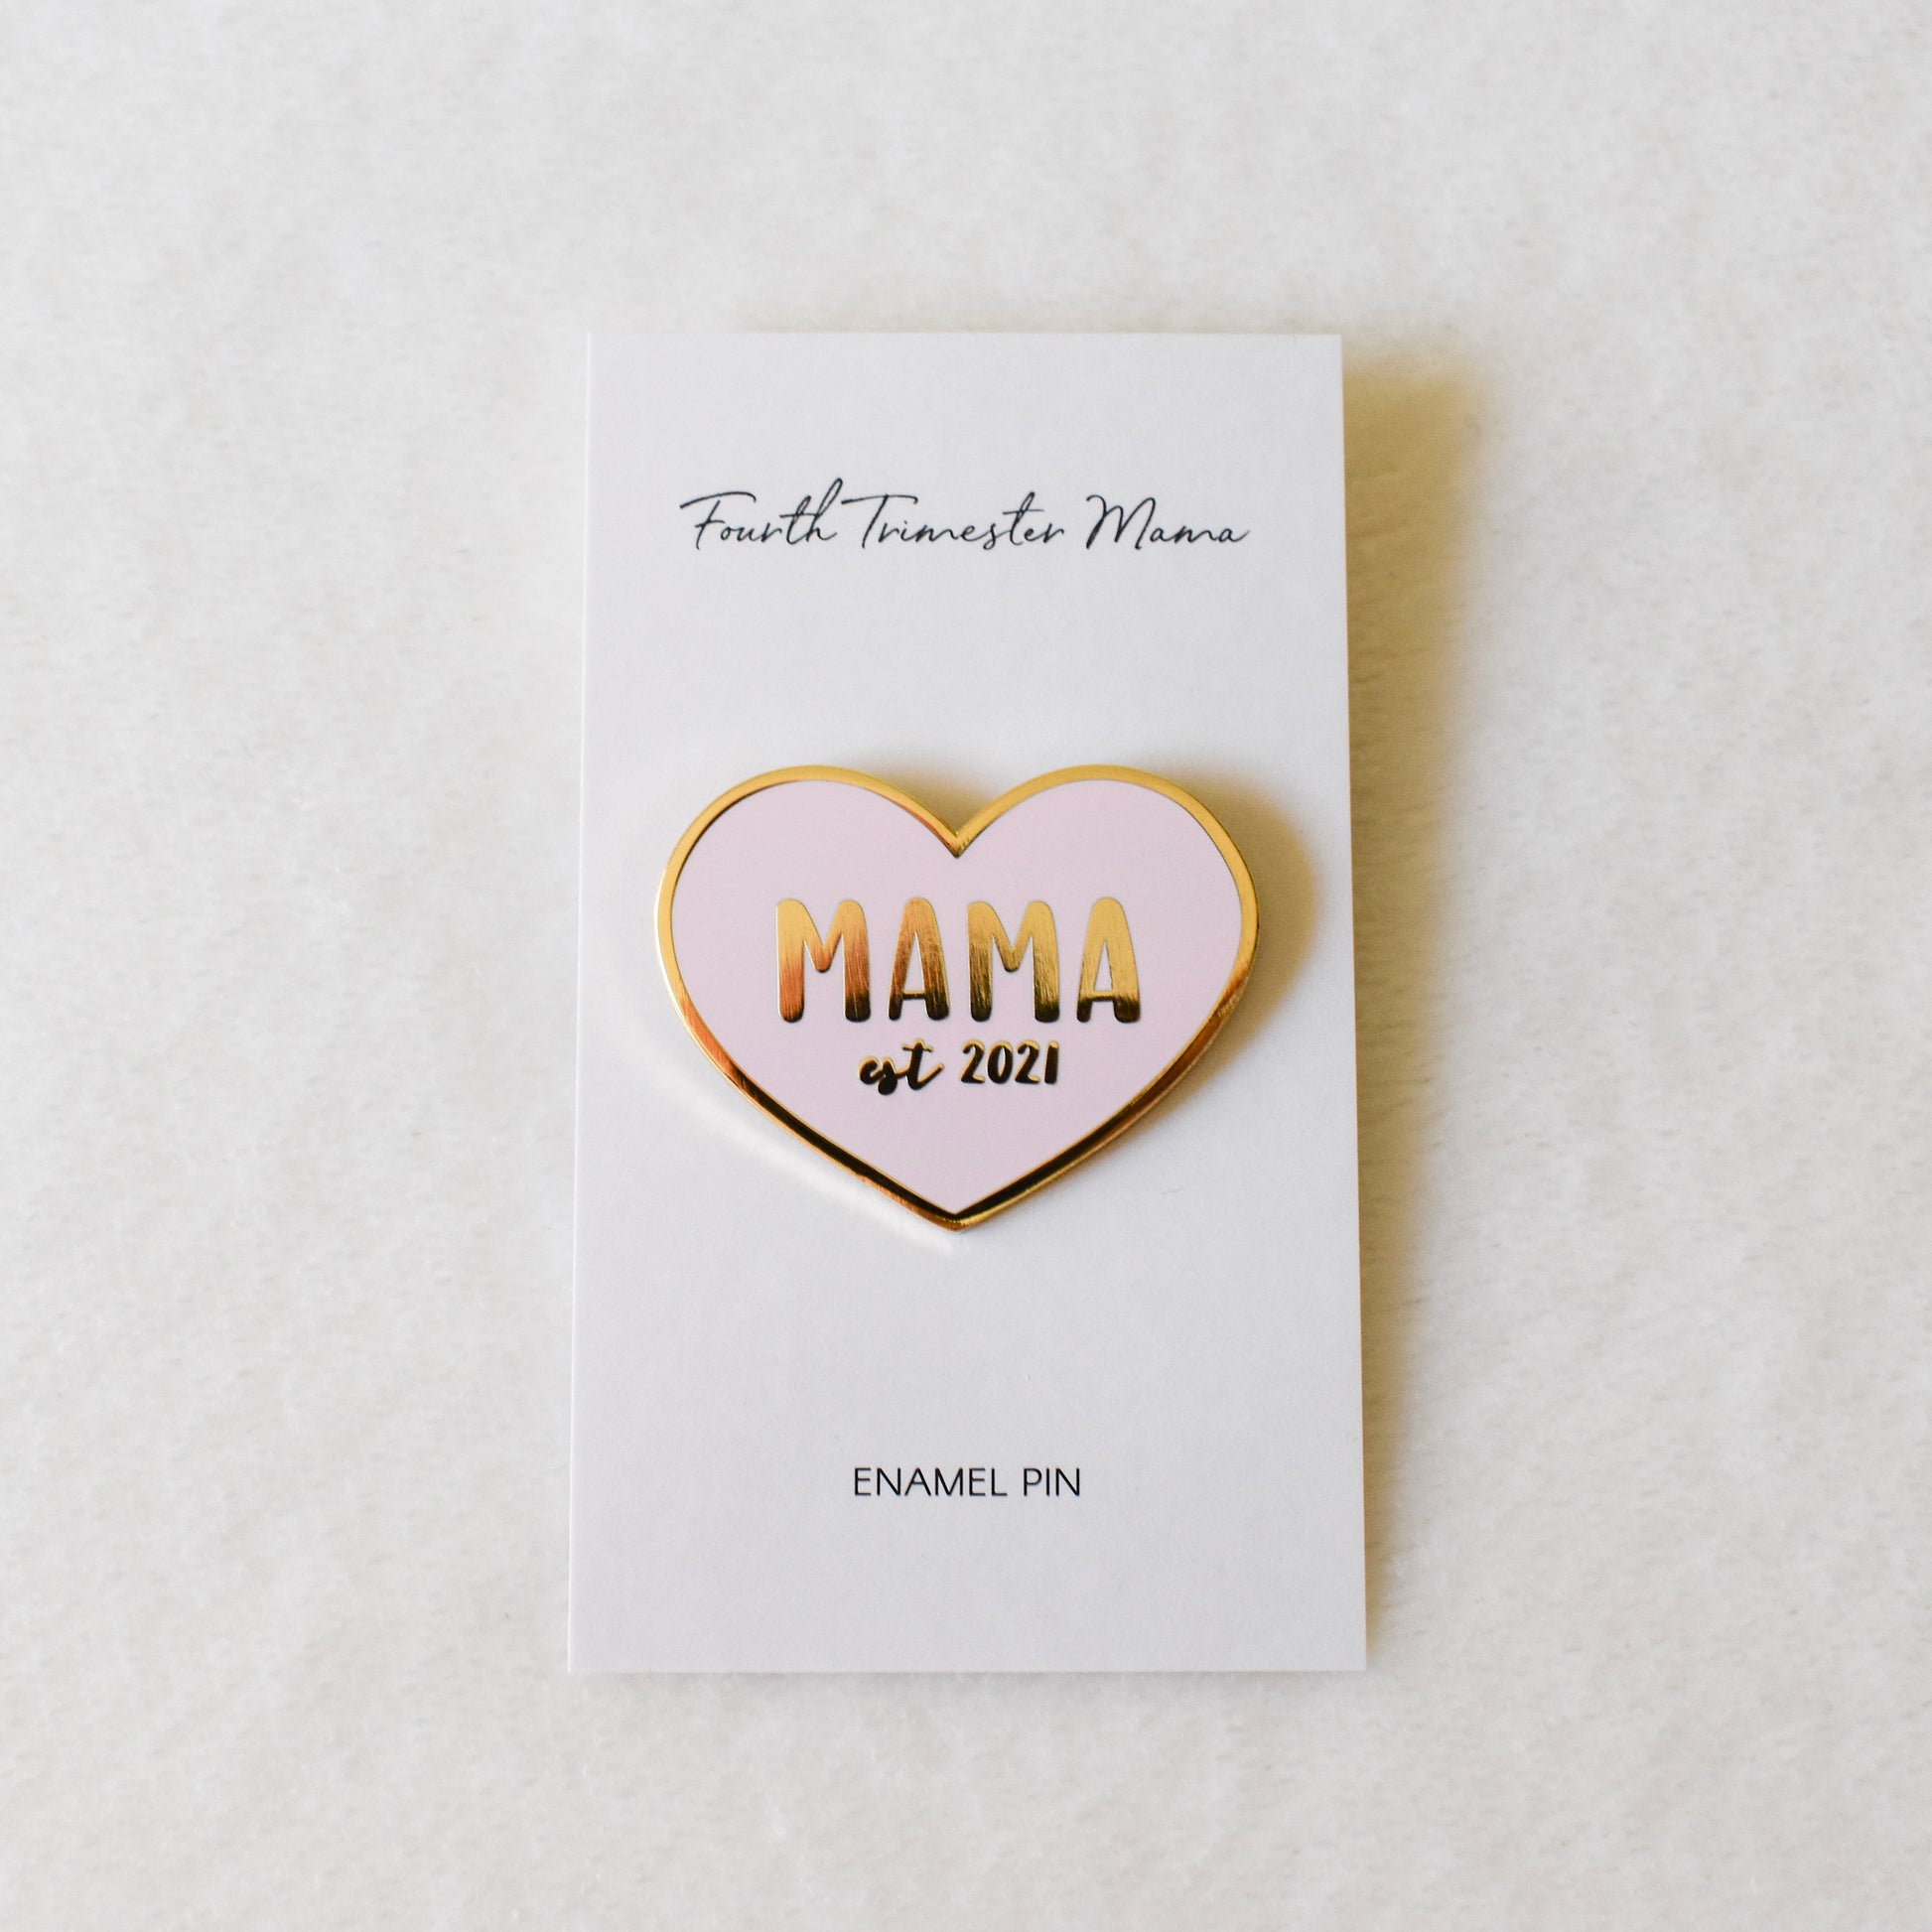 Mama enamel pin from Fourth Trimester Mama